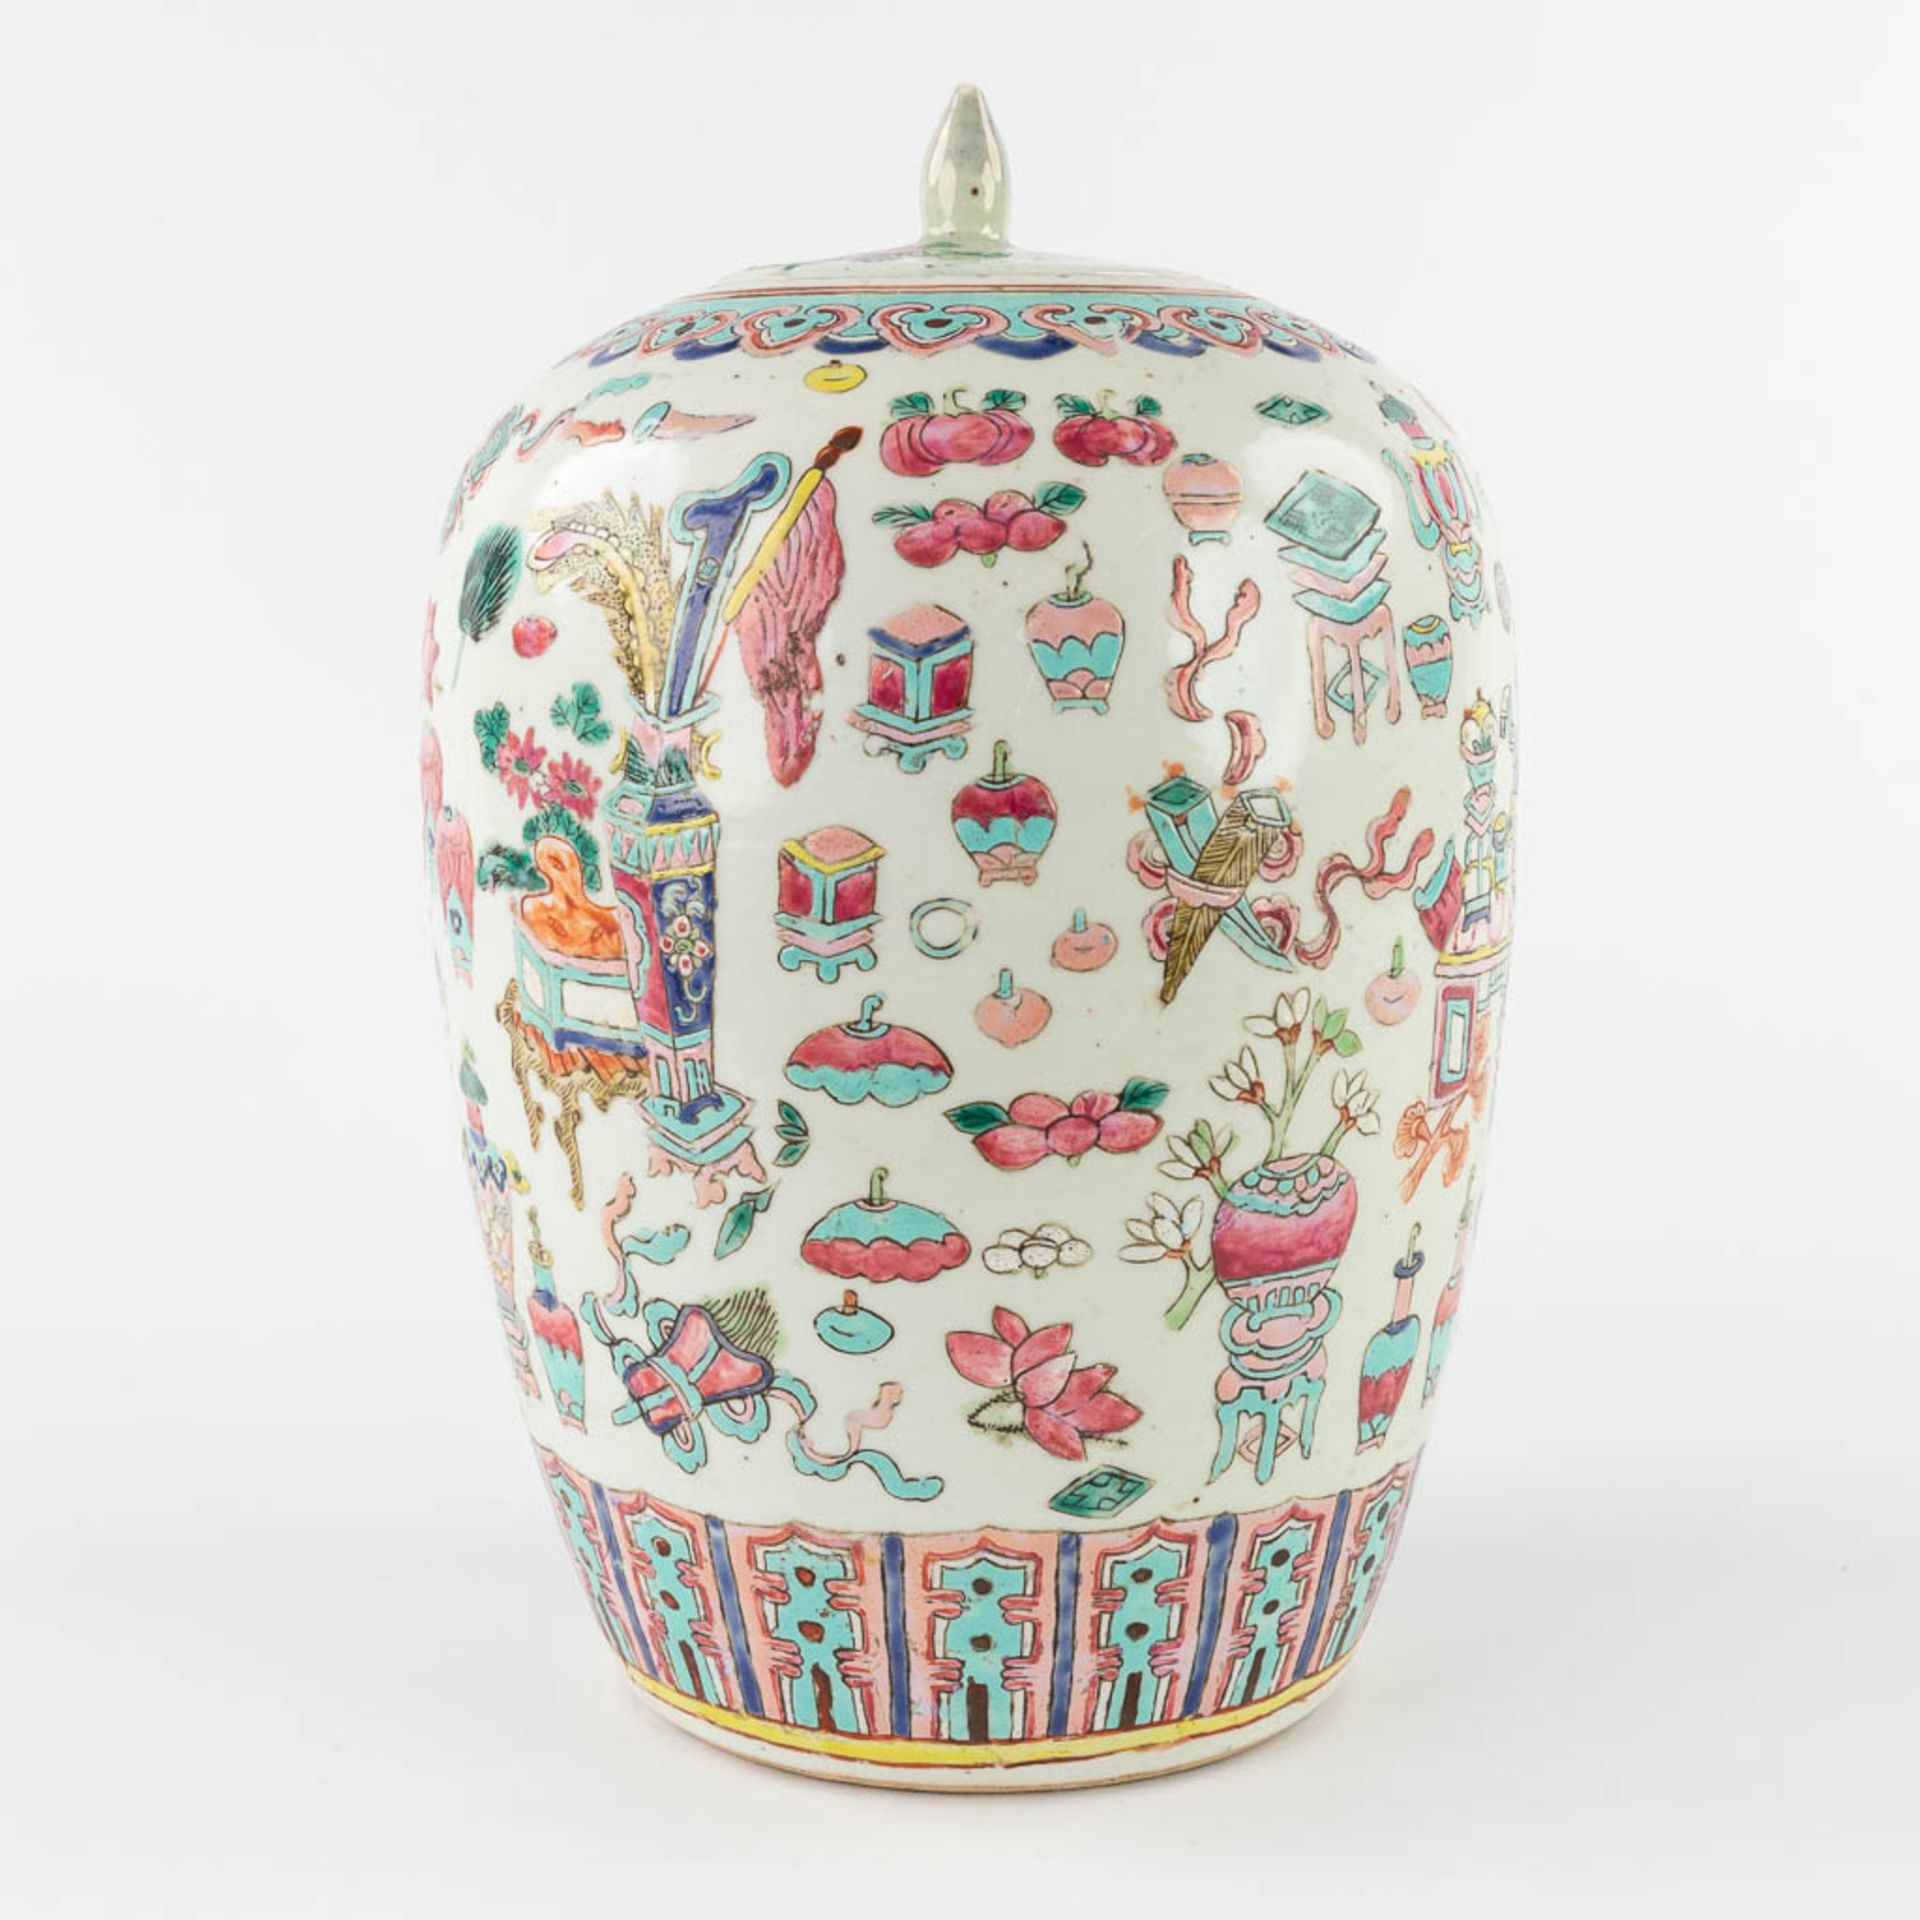 A Chinese Famille Rose ginger jar, decorated with 100 antiquities. 19th/20th C. (H:30 x D:21 cm) - Image 3 of 16